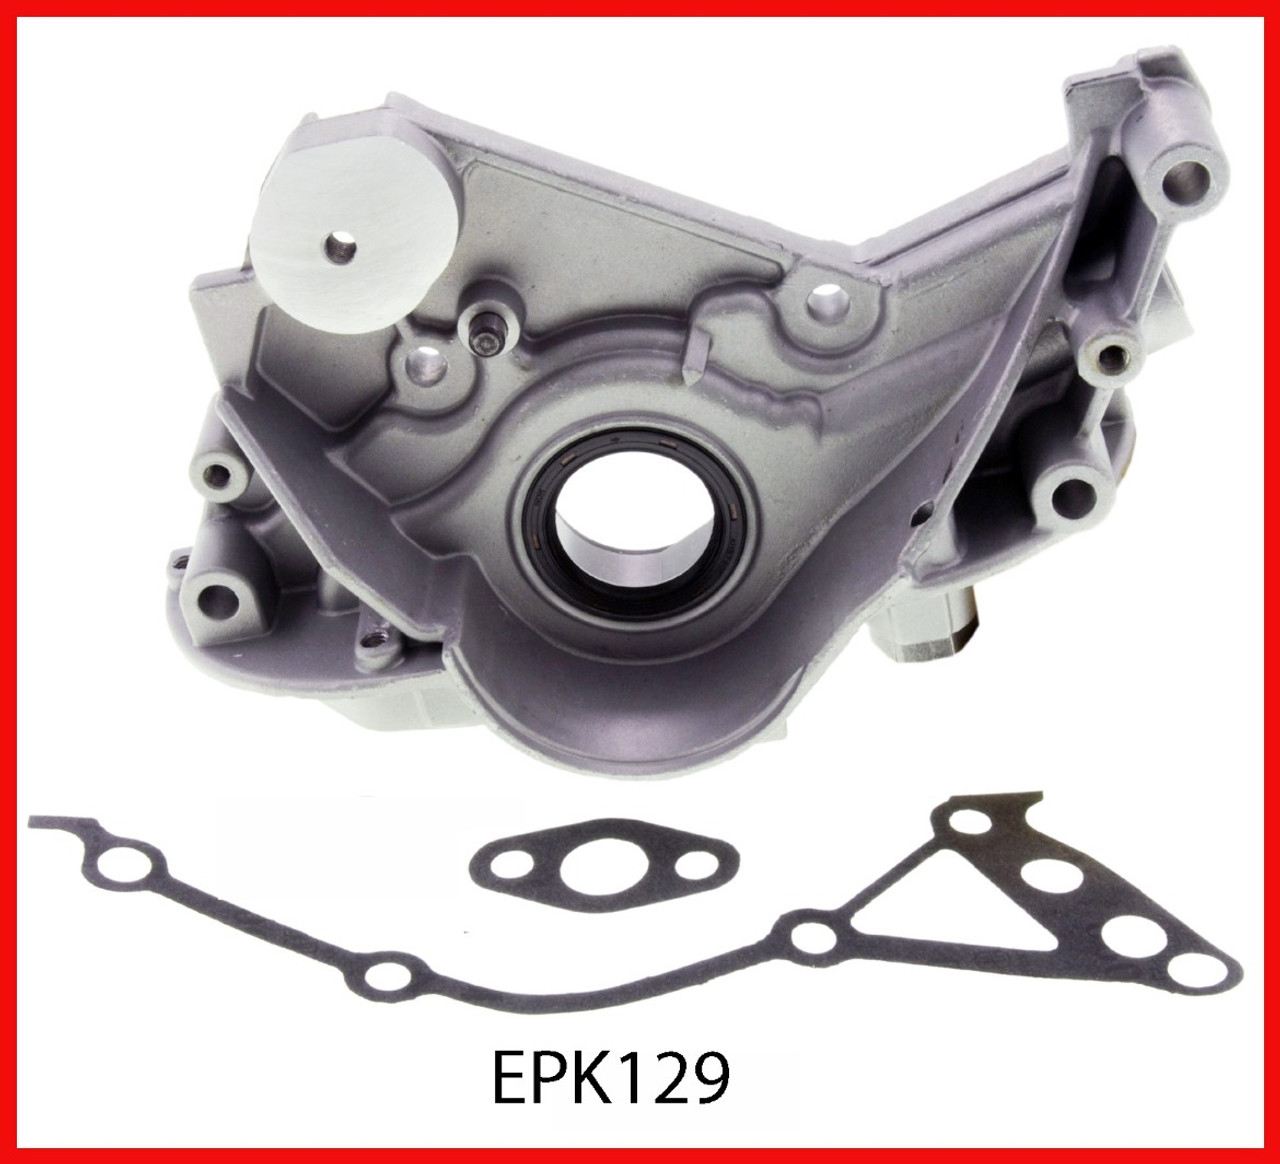 Oil Pump - 1987 Plymouth Grand Voyager 3.0L (EPK129.A4)